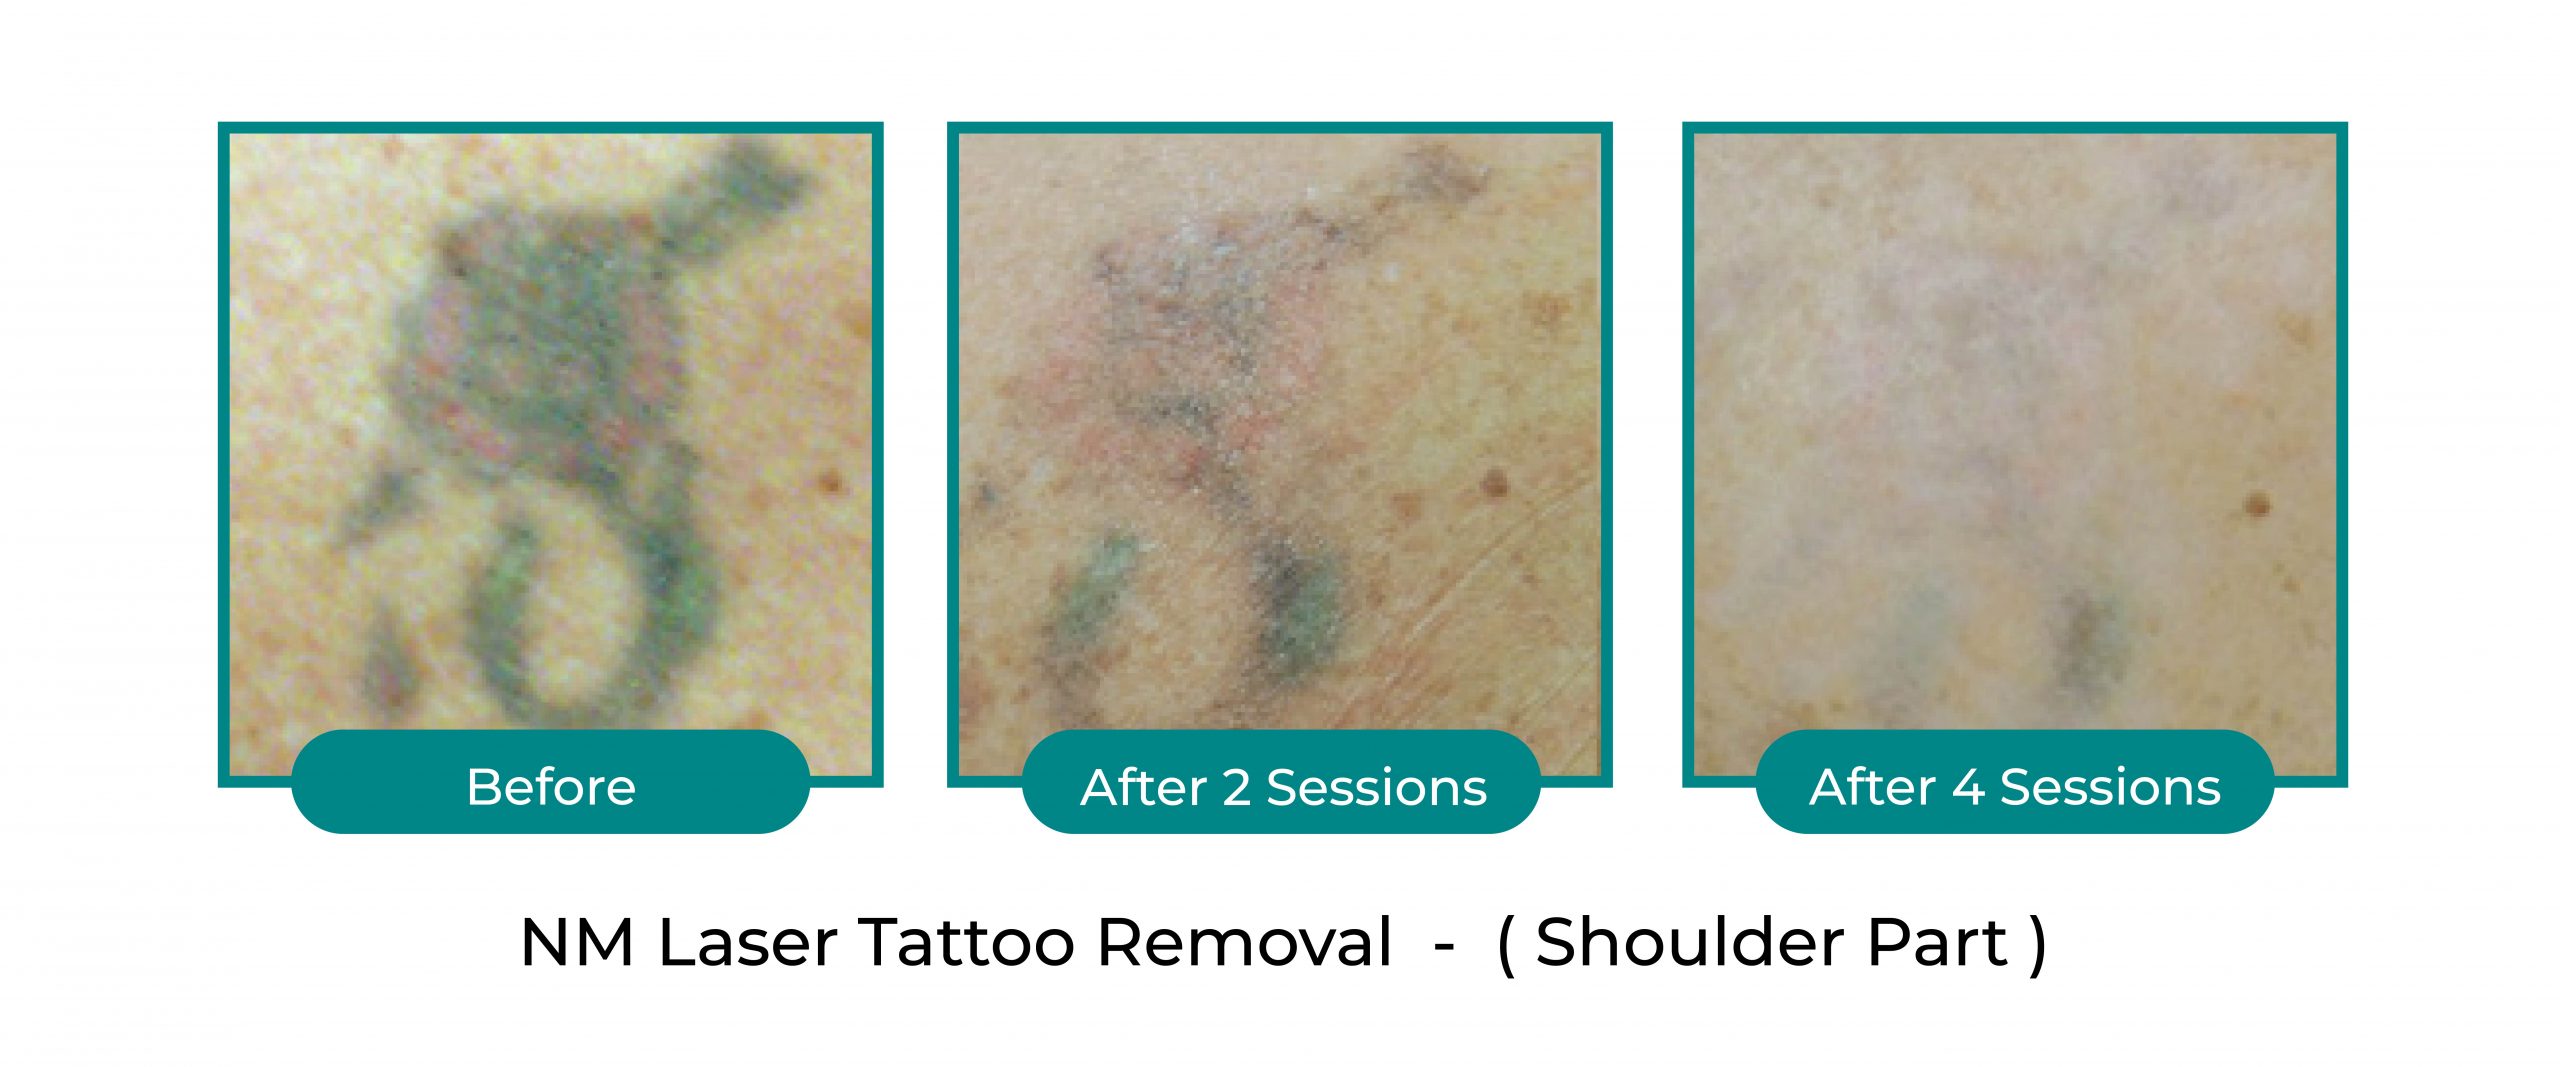 NextMed-Laser-tattoo-before-after-official-2-scaled.jpg